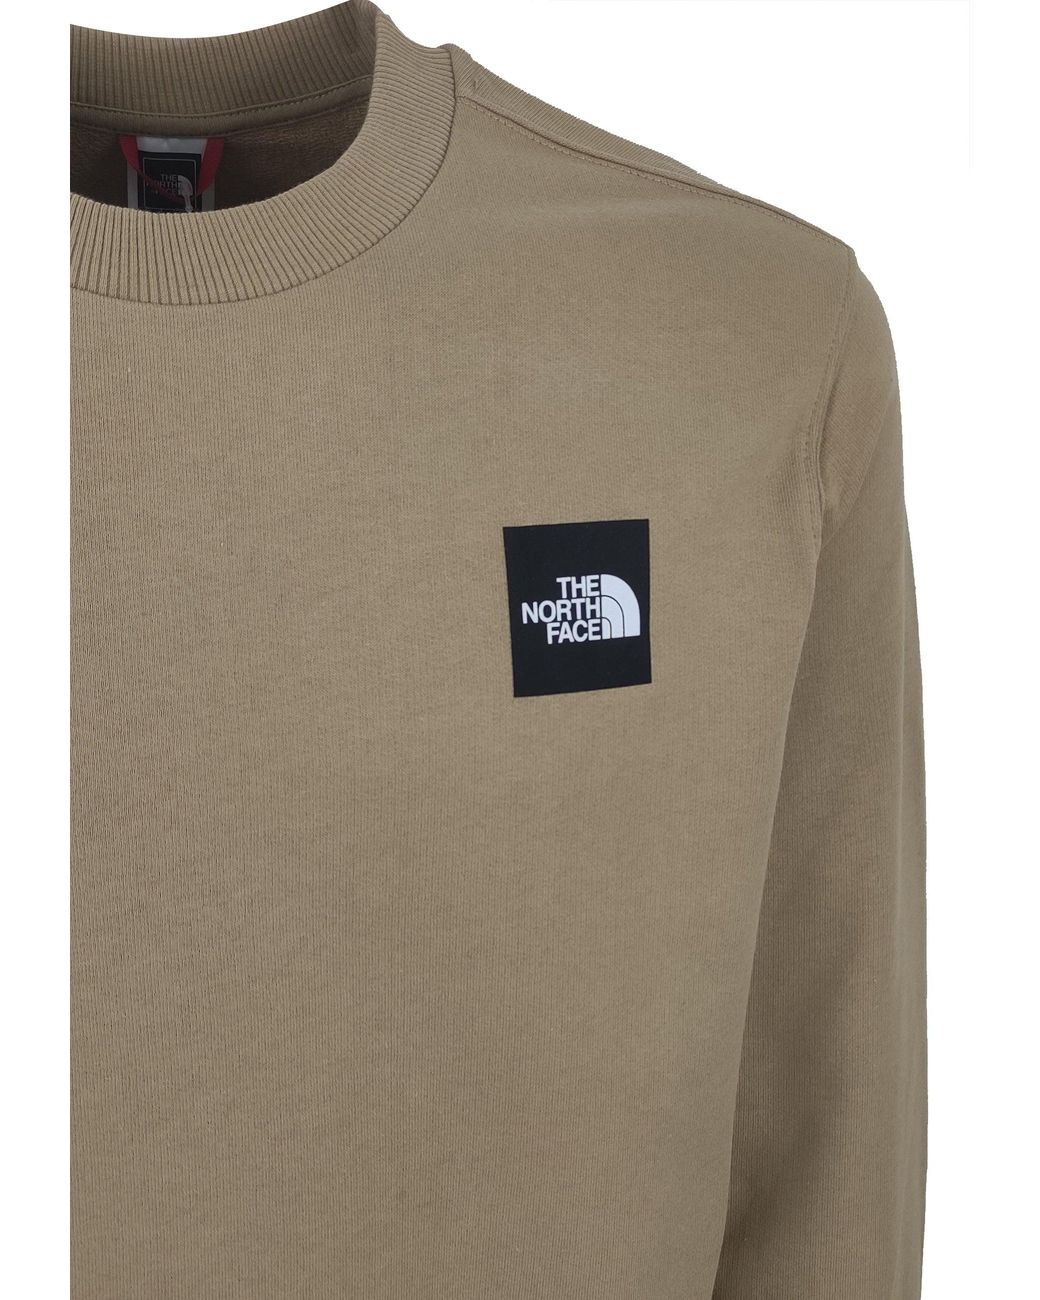 The North Face Sweatshirt Camel In Cotton in Brown for Men | Lyst